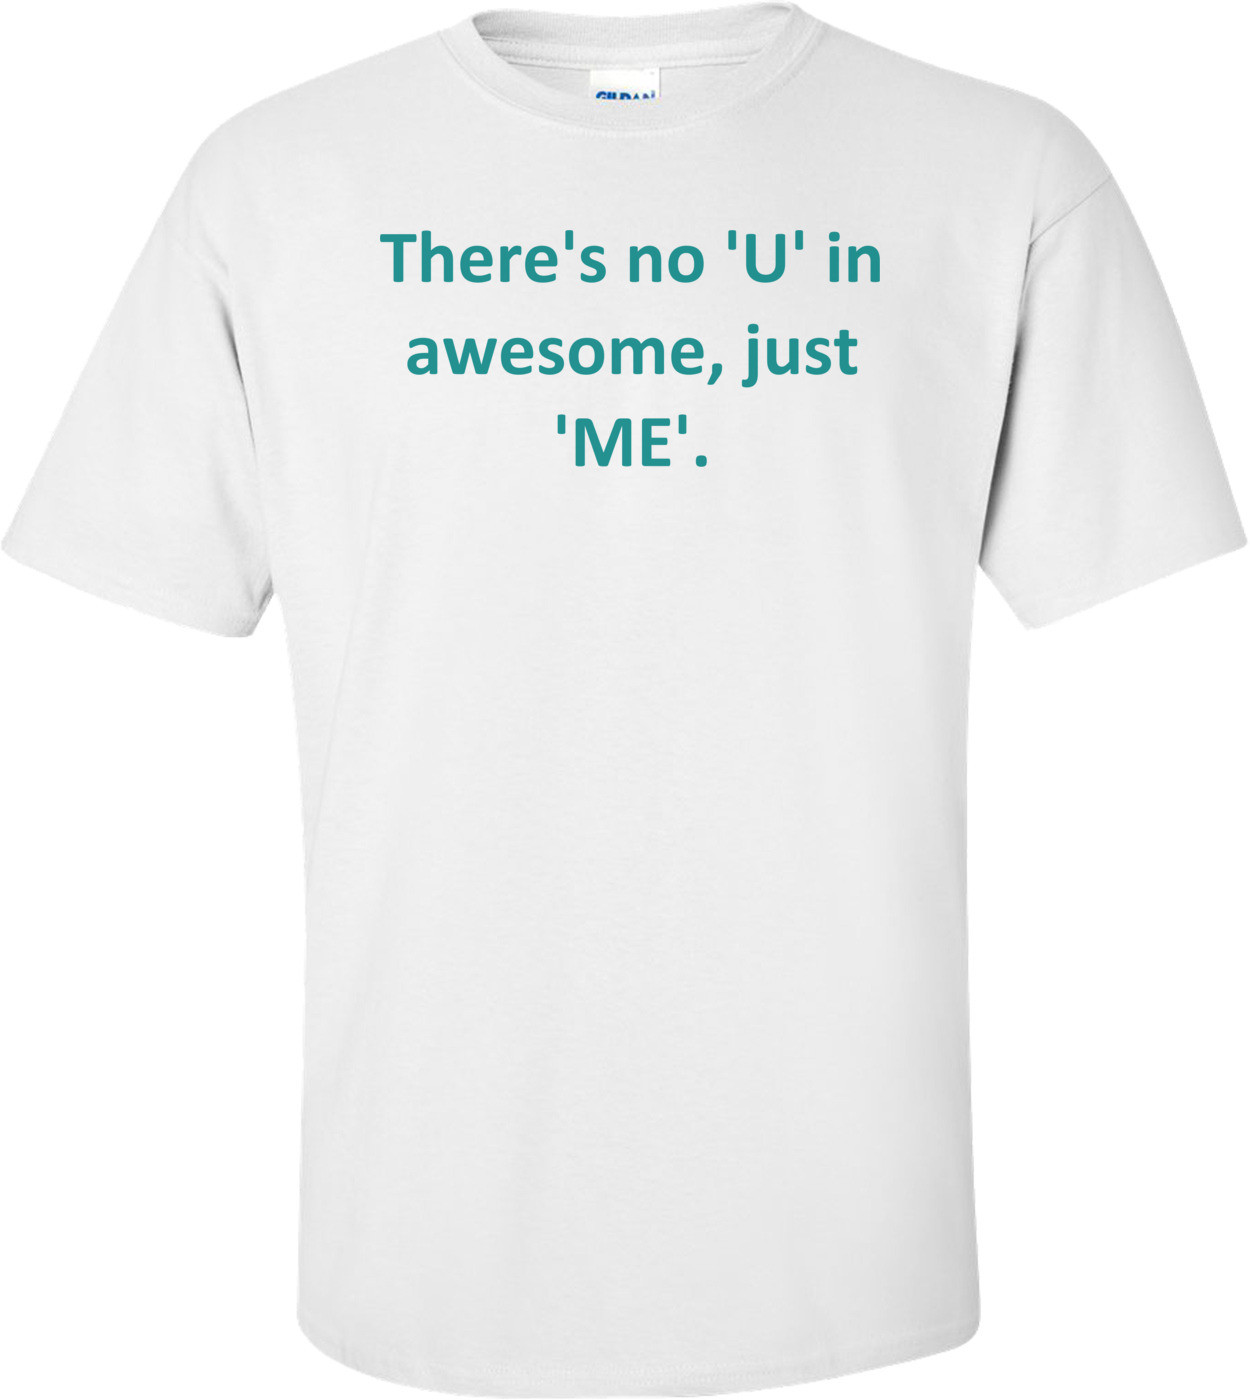 There's no 'U' in awesome, just 'ME'. Shirt